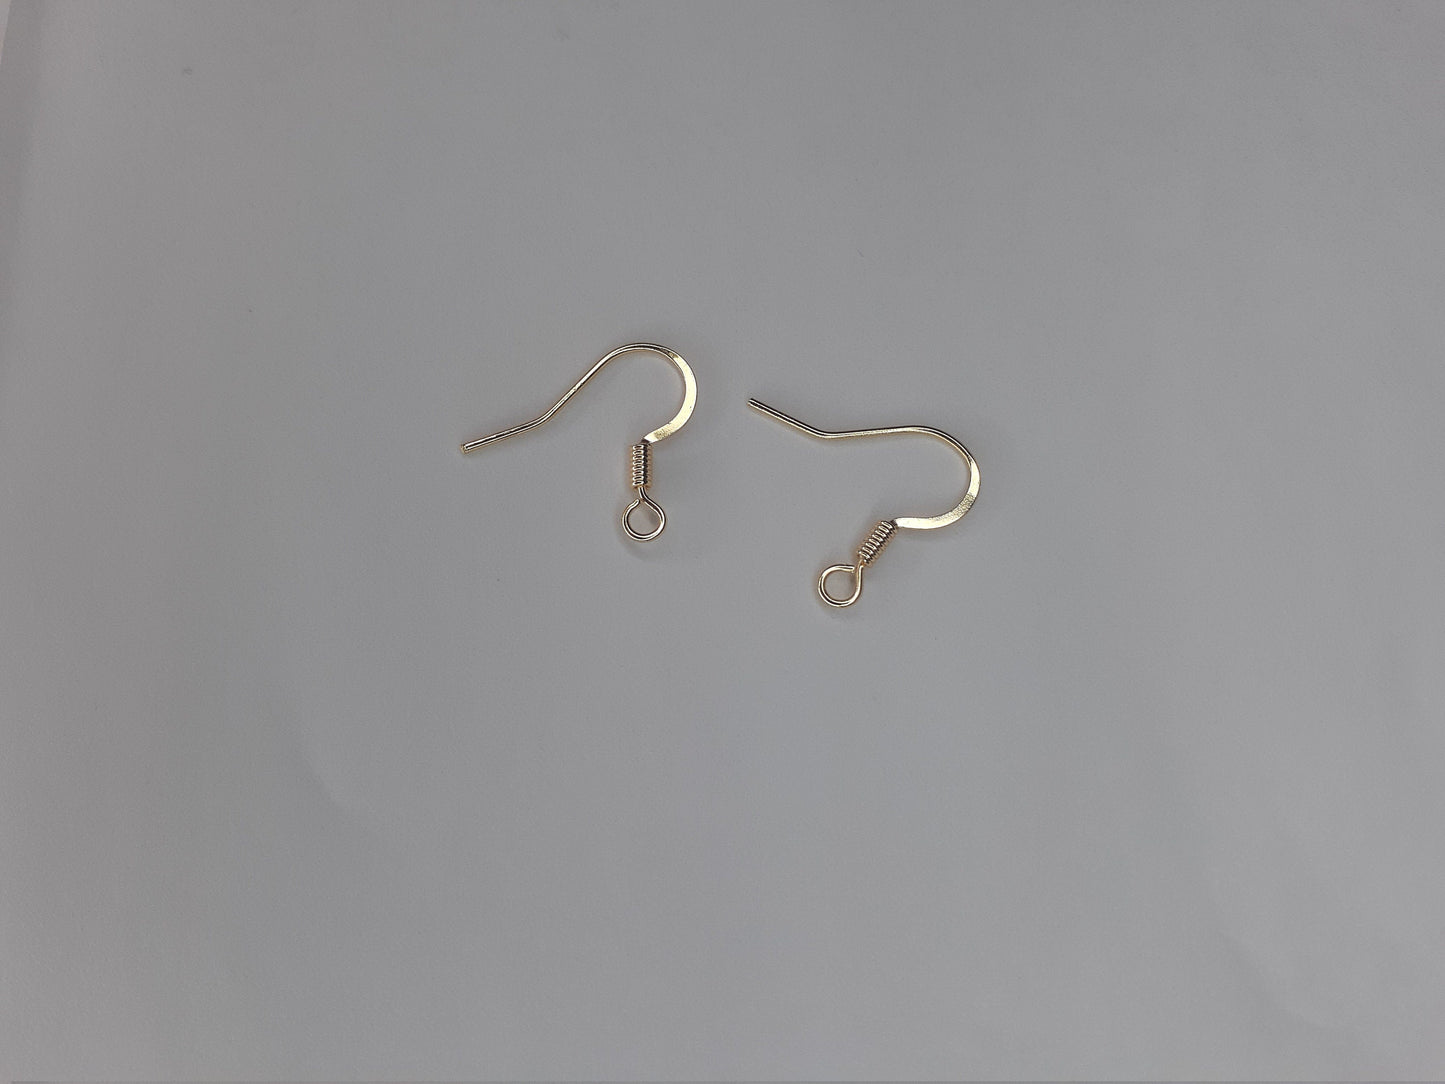 14KGF wire earring option available